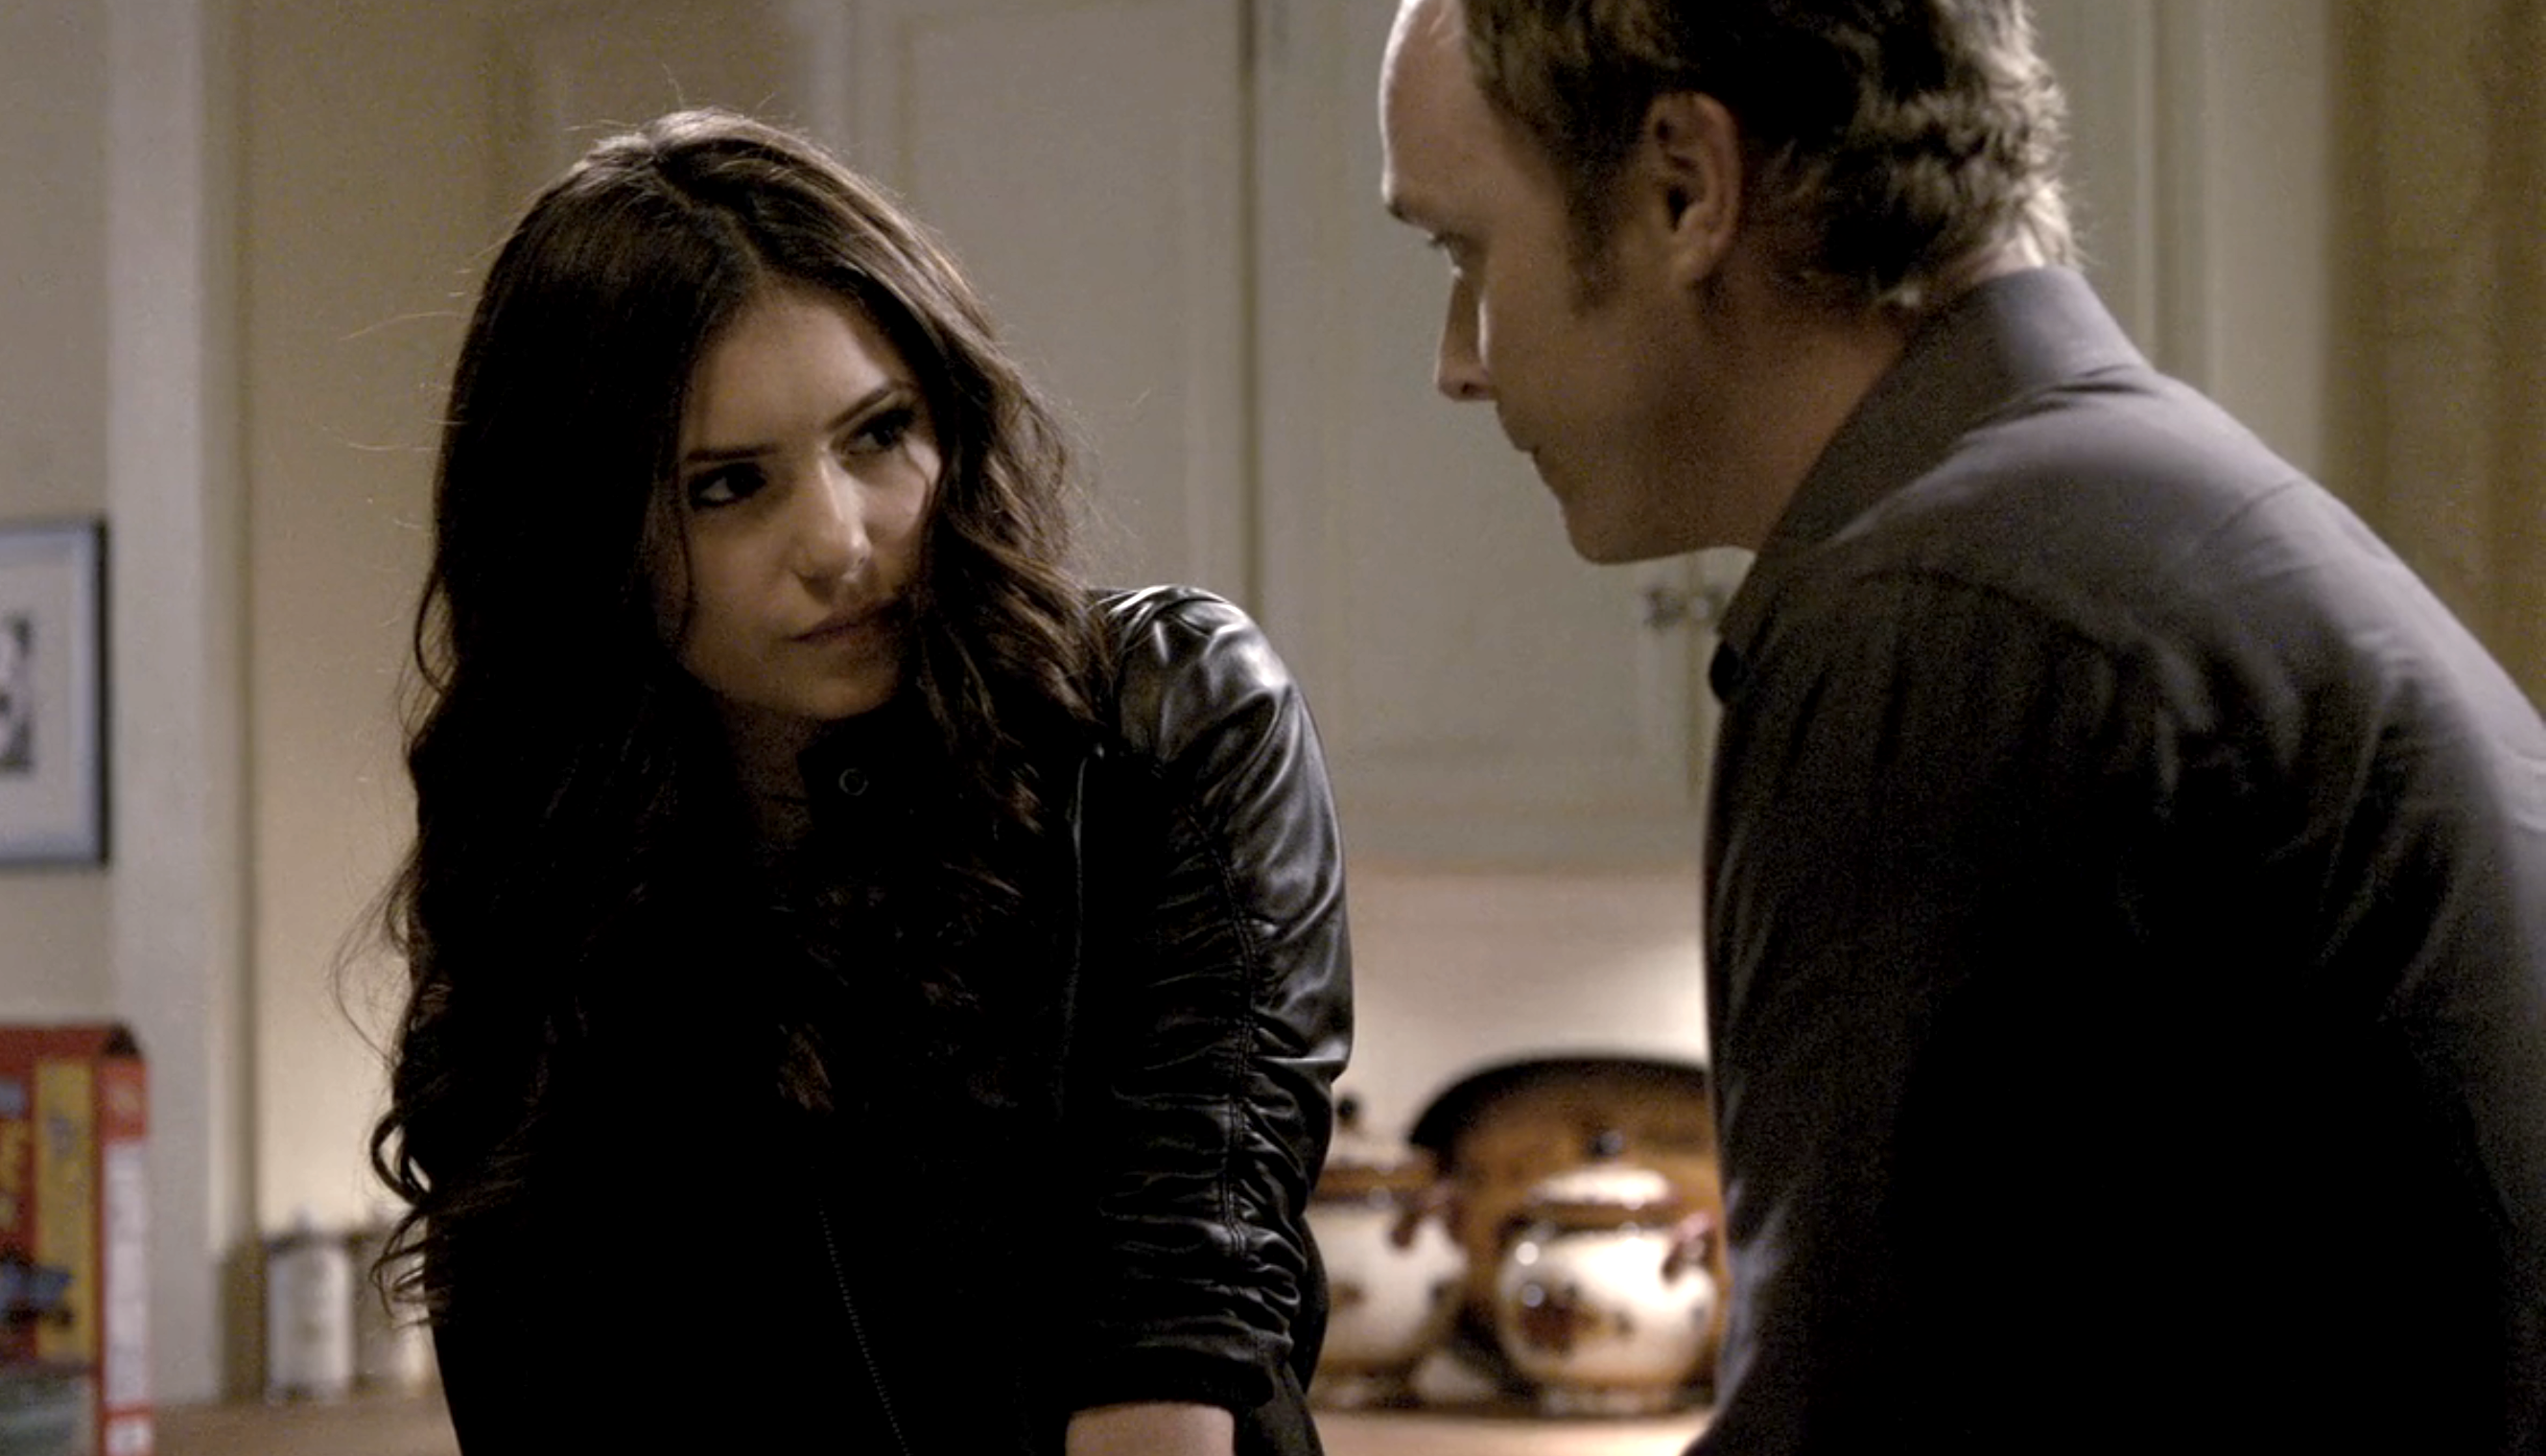 Katherine and John having a stare down